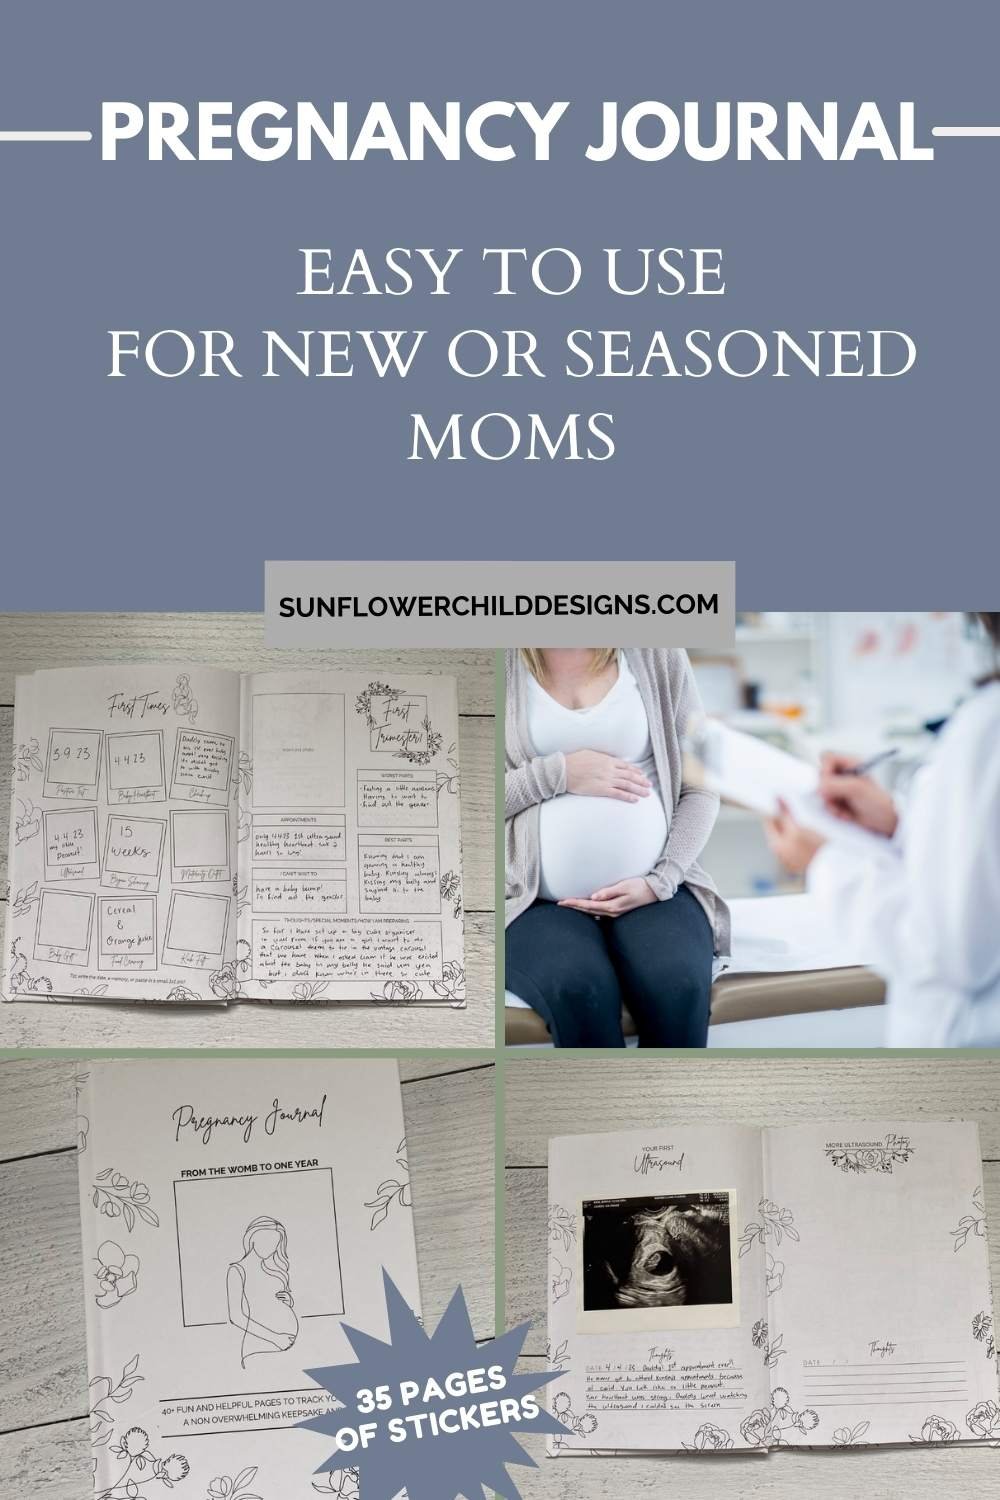 Best Pregnancy Journal for Busy Moms